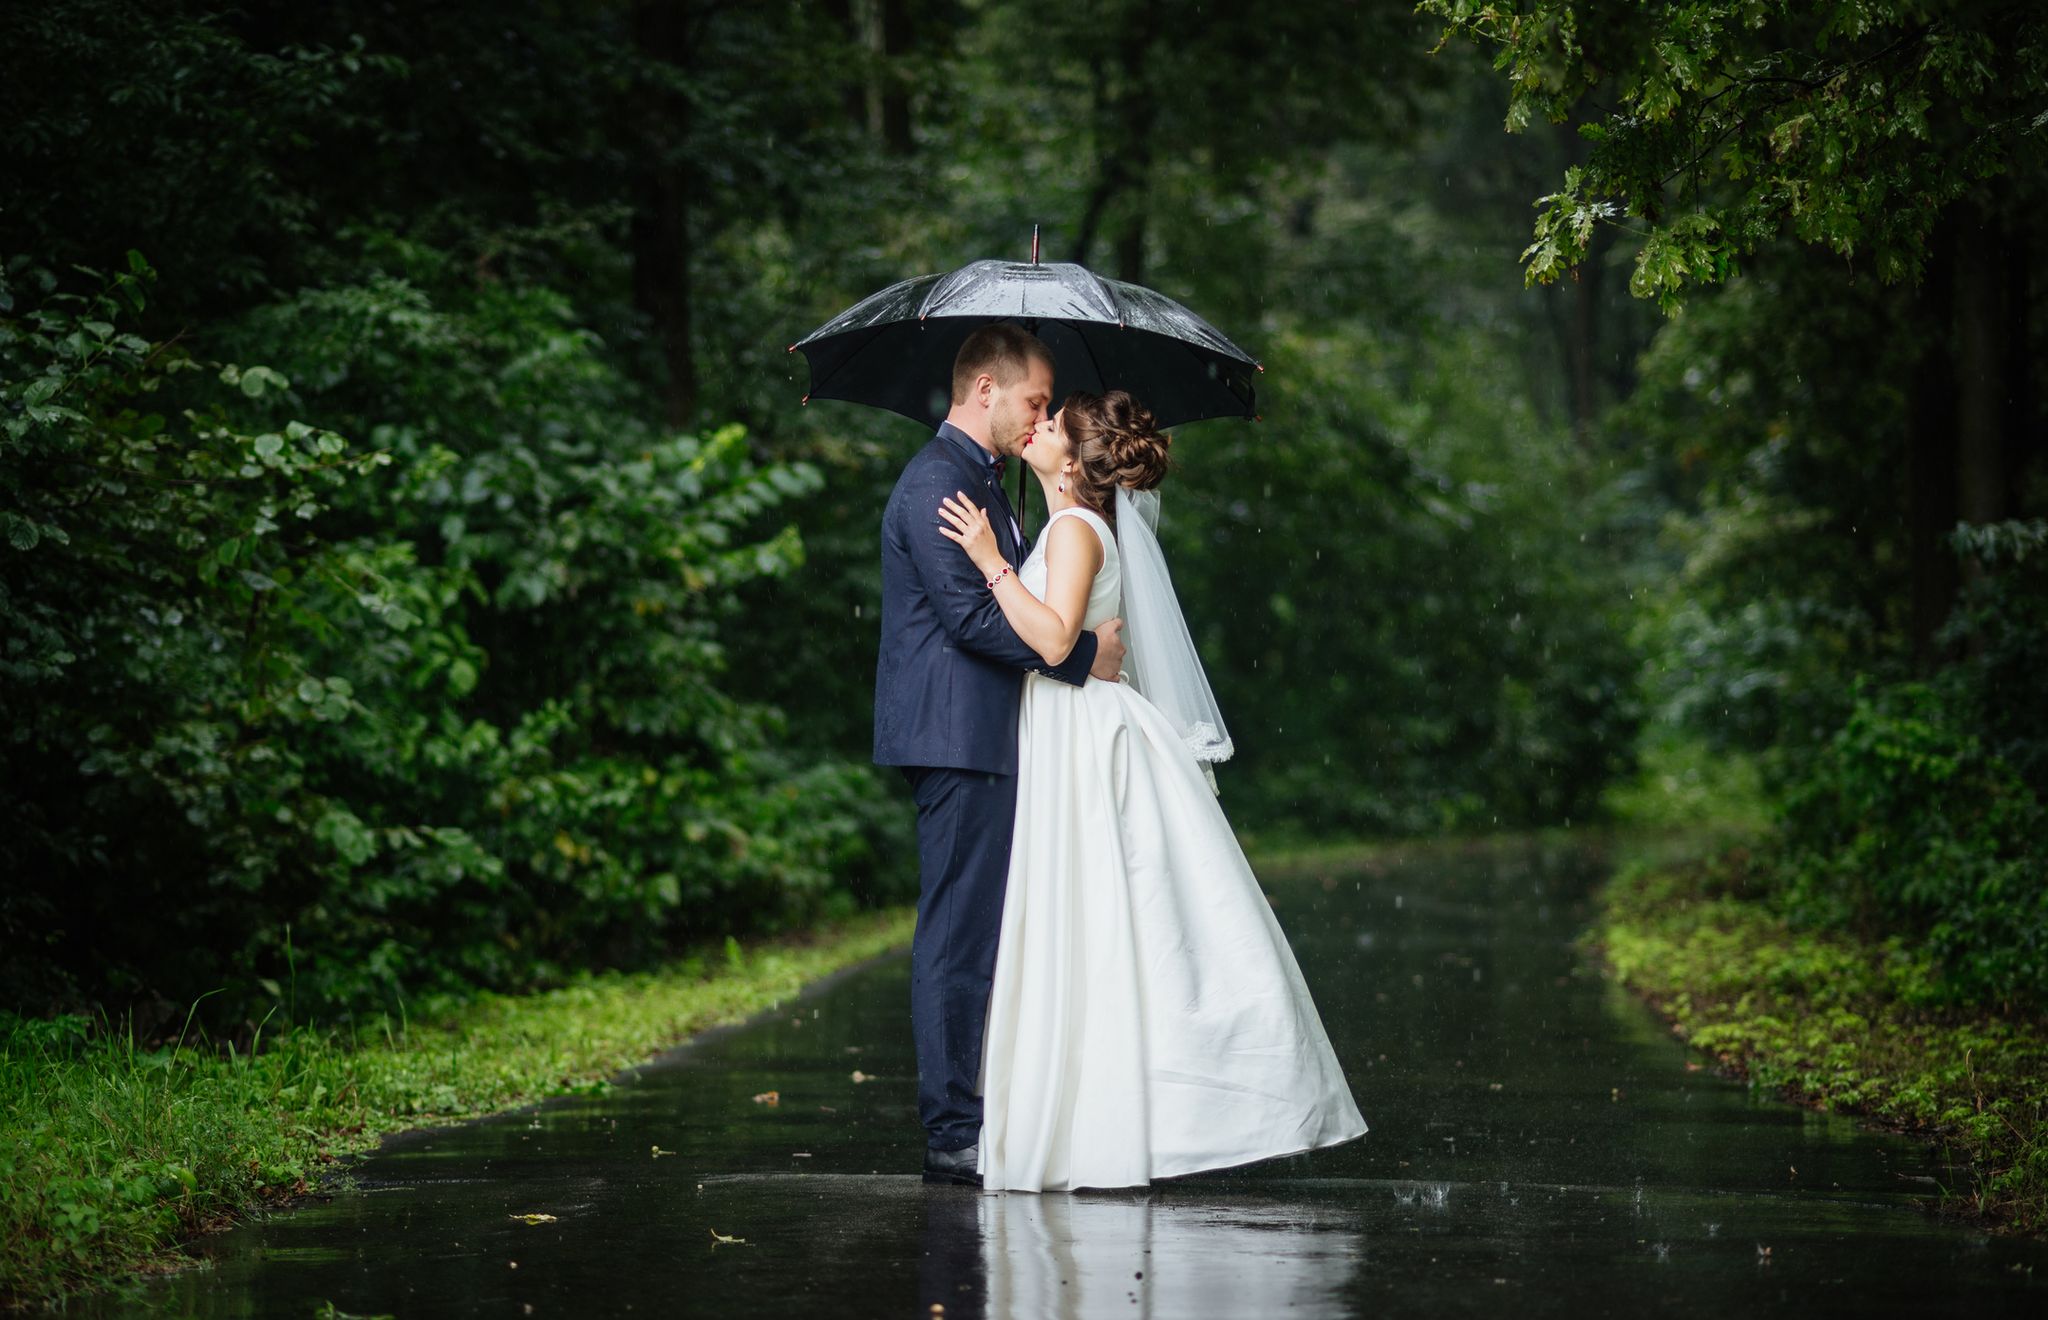 The bride kisses the groom on a background of green nature in the rain with an umbrella